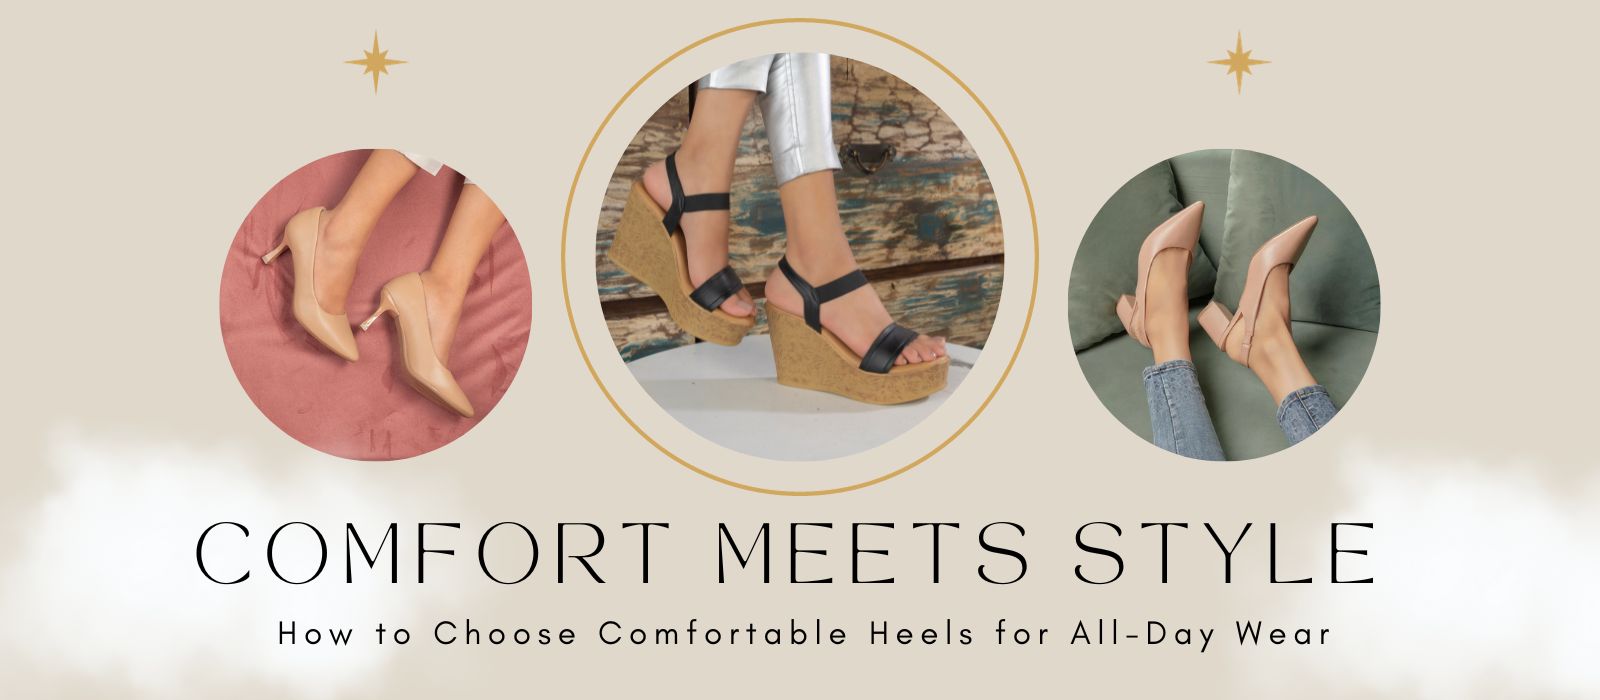 Comfort Meets Style: How to Choose Comfortable Heels for All-Day Wear